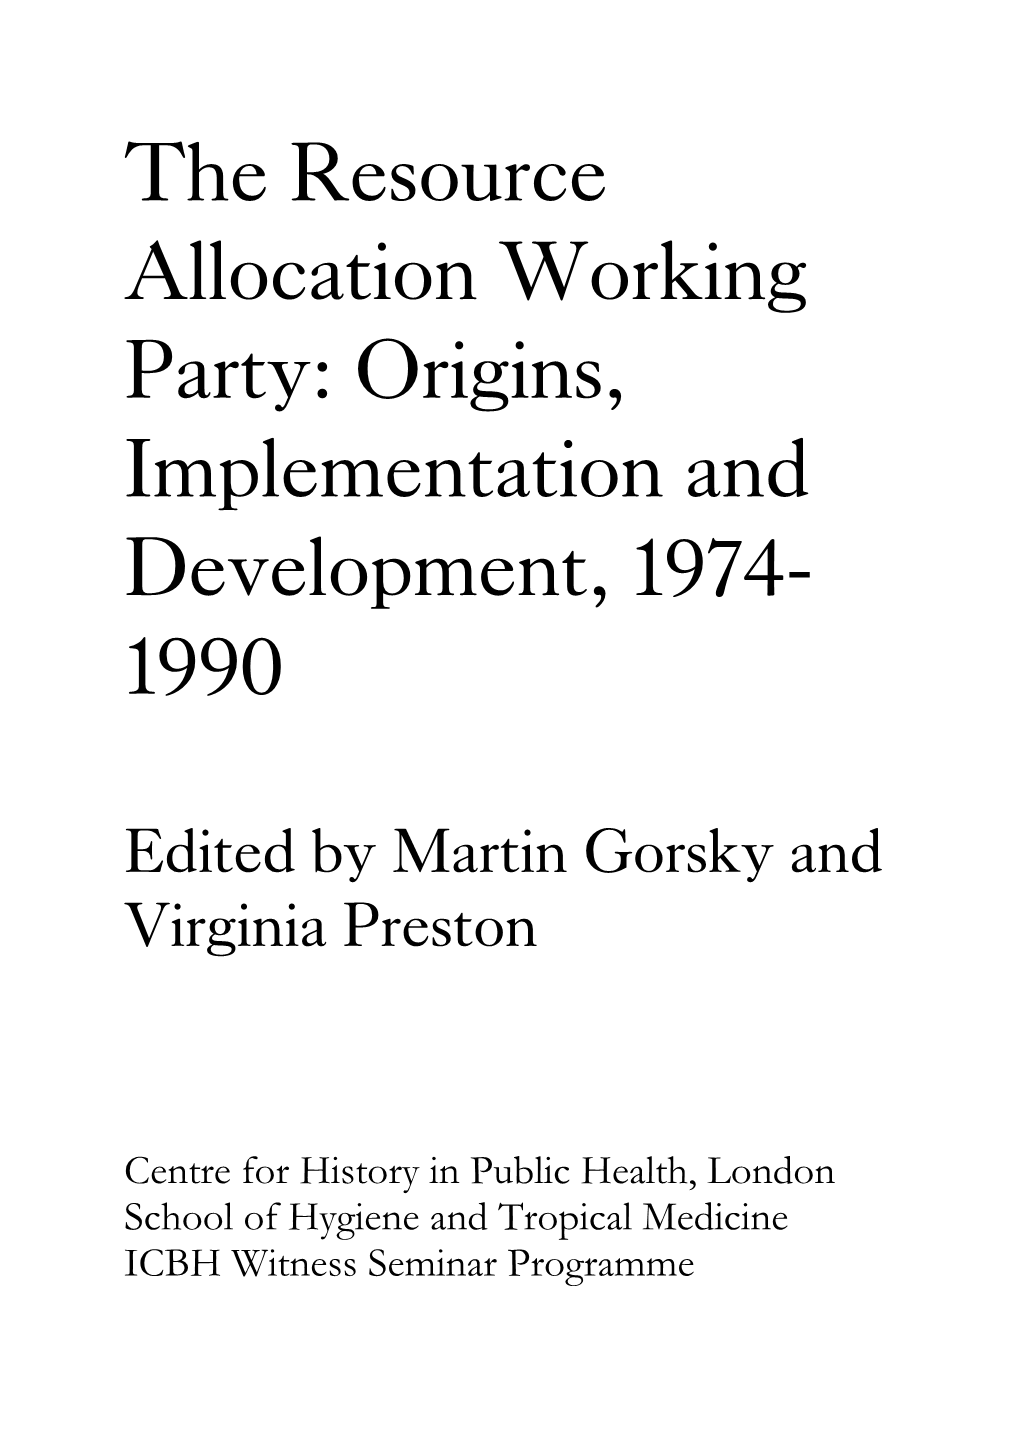 The Resource Allocation Working Party: Origins, Implementation and Development, 1974- 1990